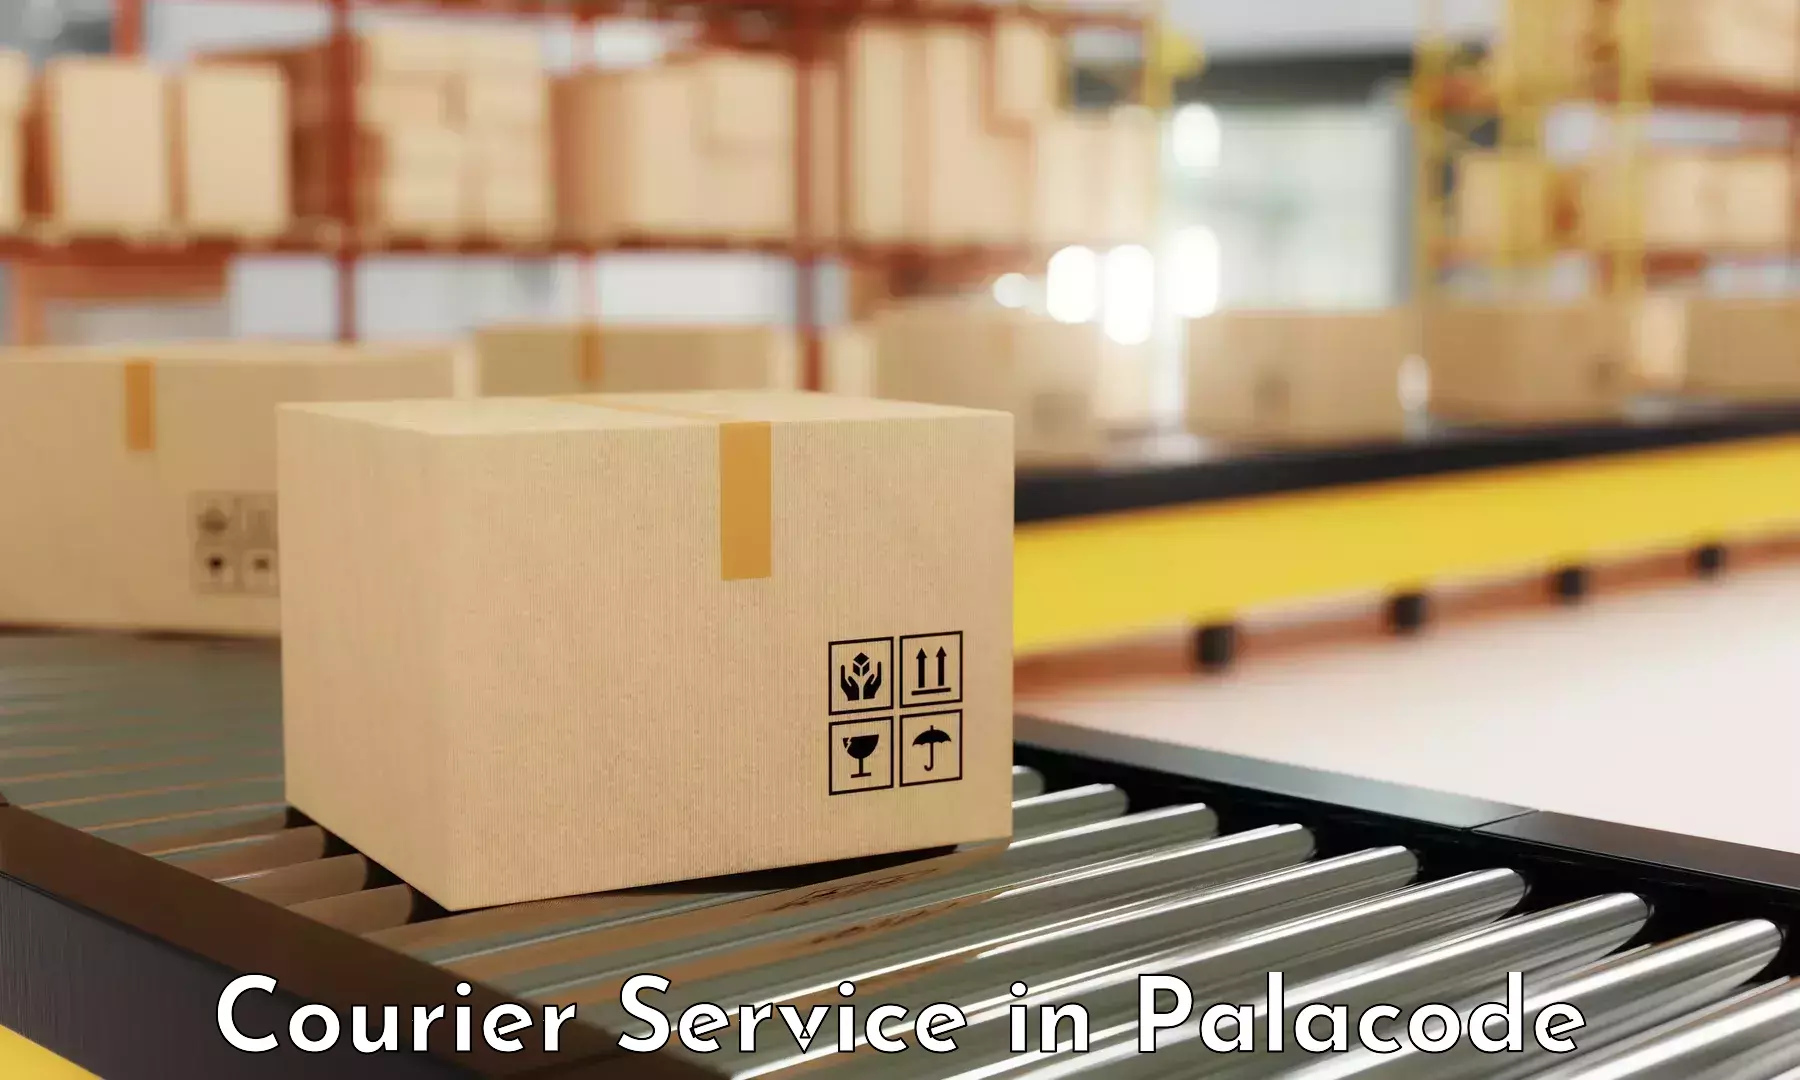 Smart parcel tracking in Palacode